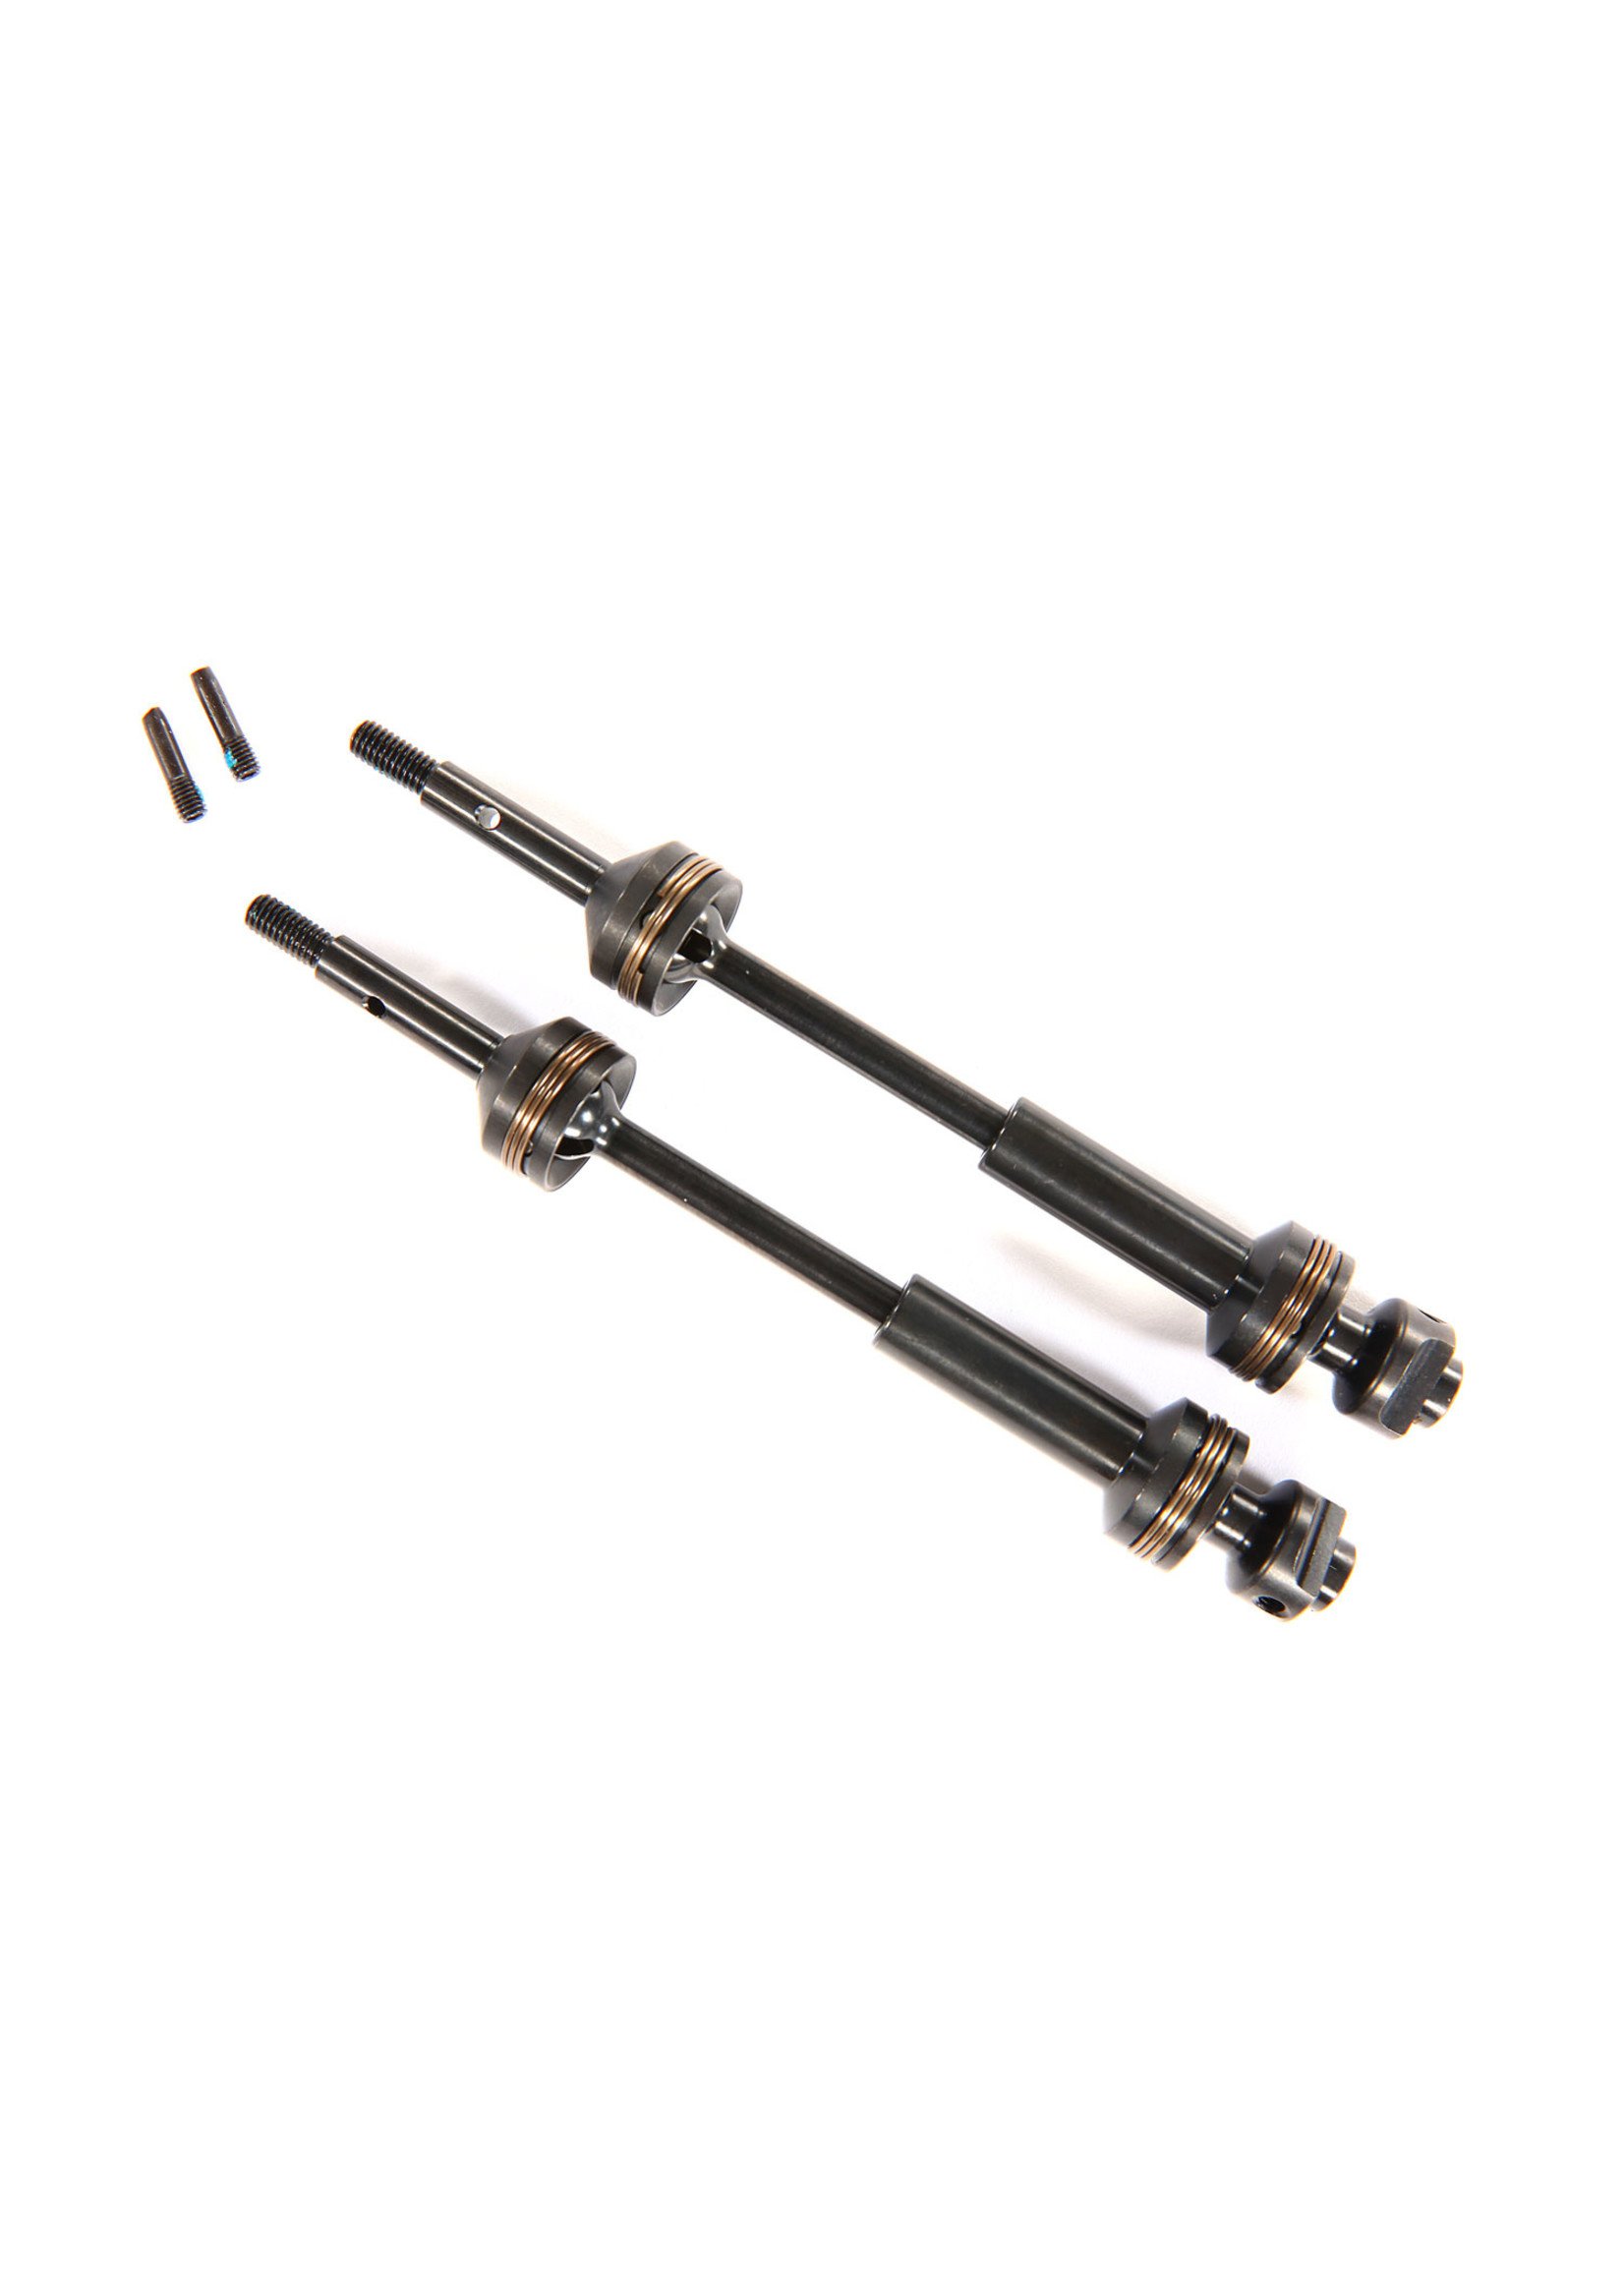 Traxxas TRA9052X Traxxas Driveshafts, rear, steel-spline constant-velocity (complete assembly) (2)